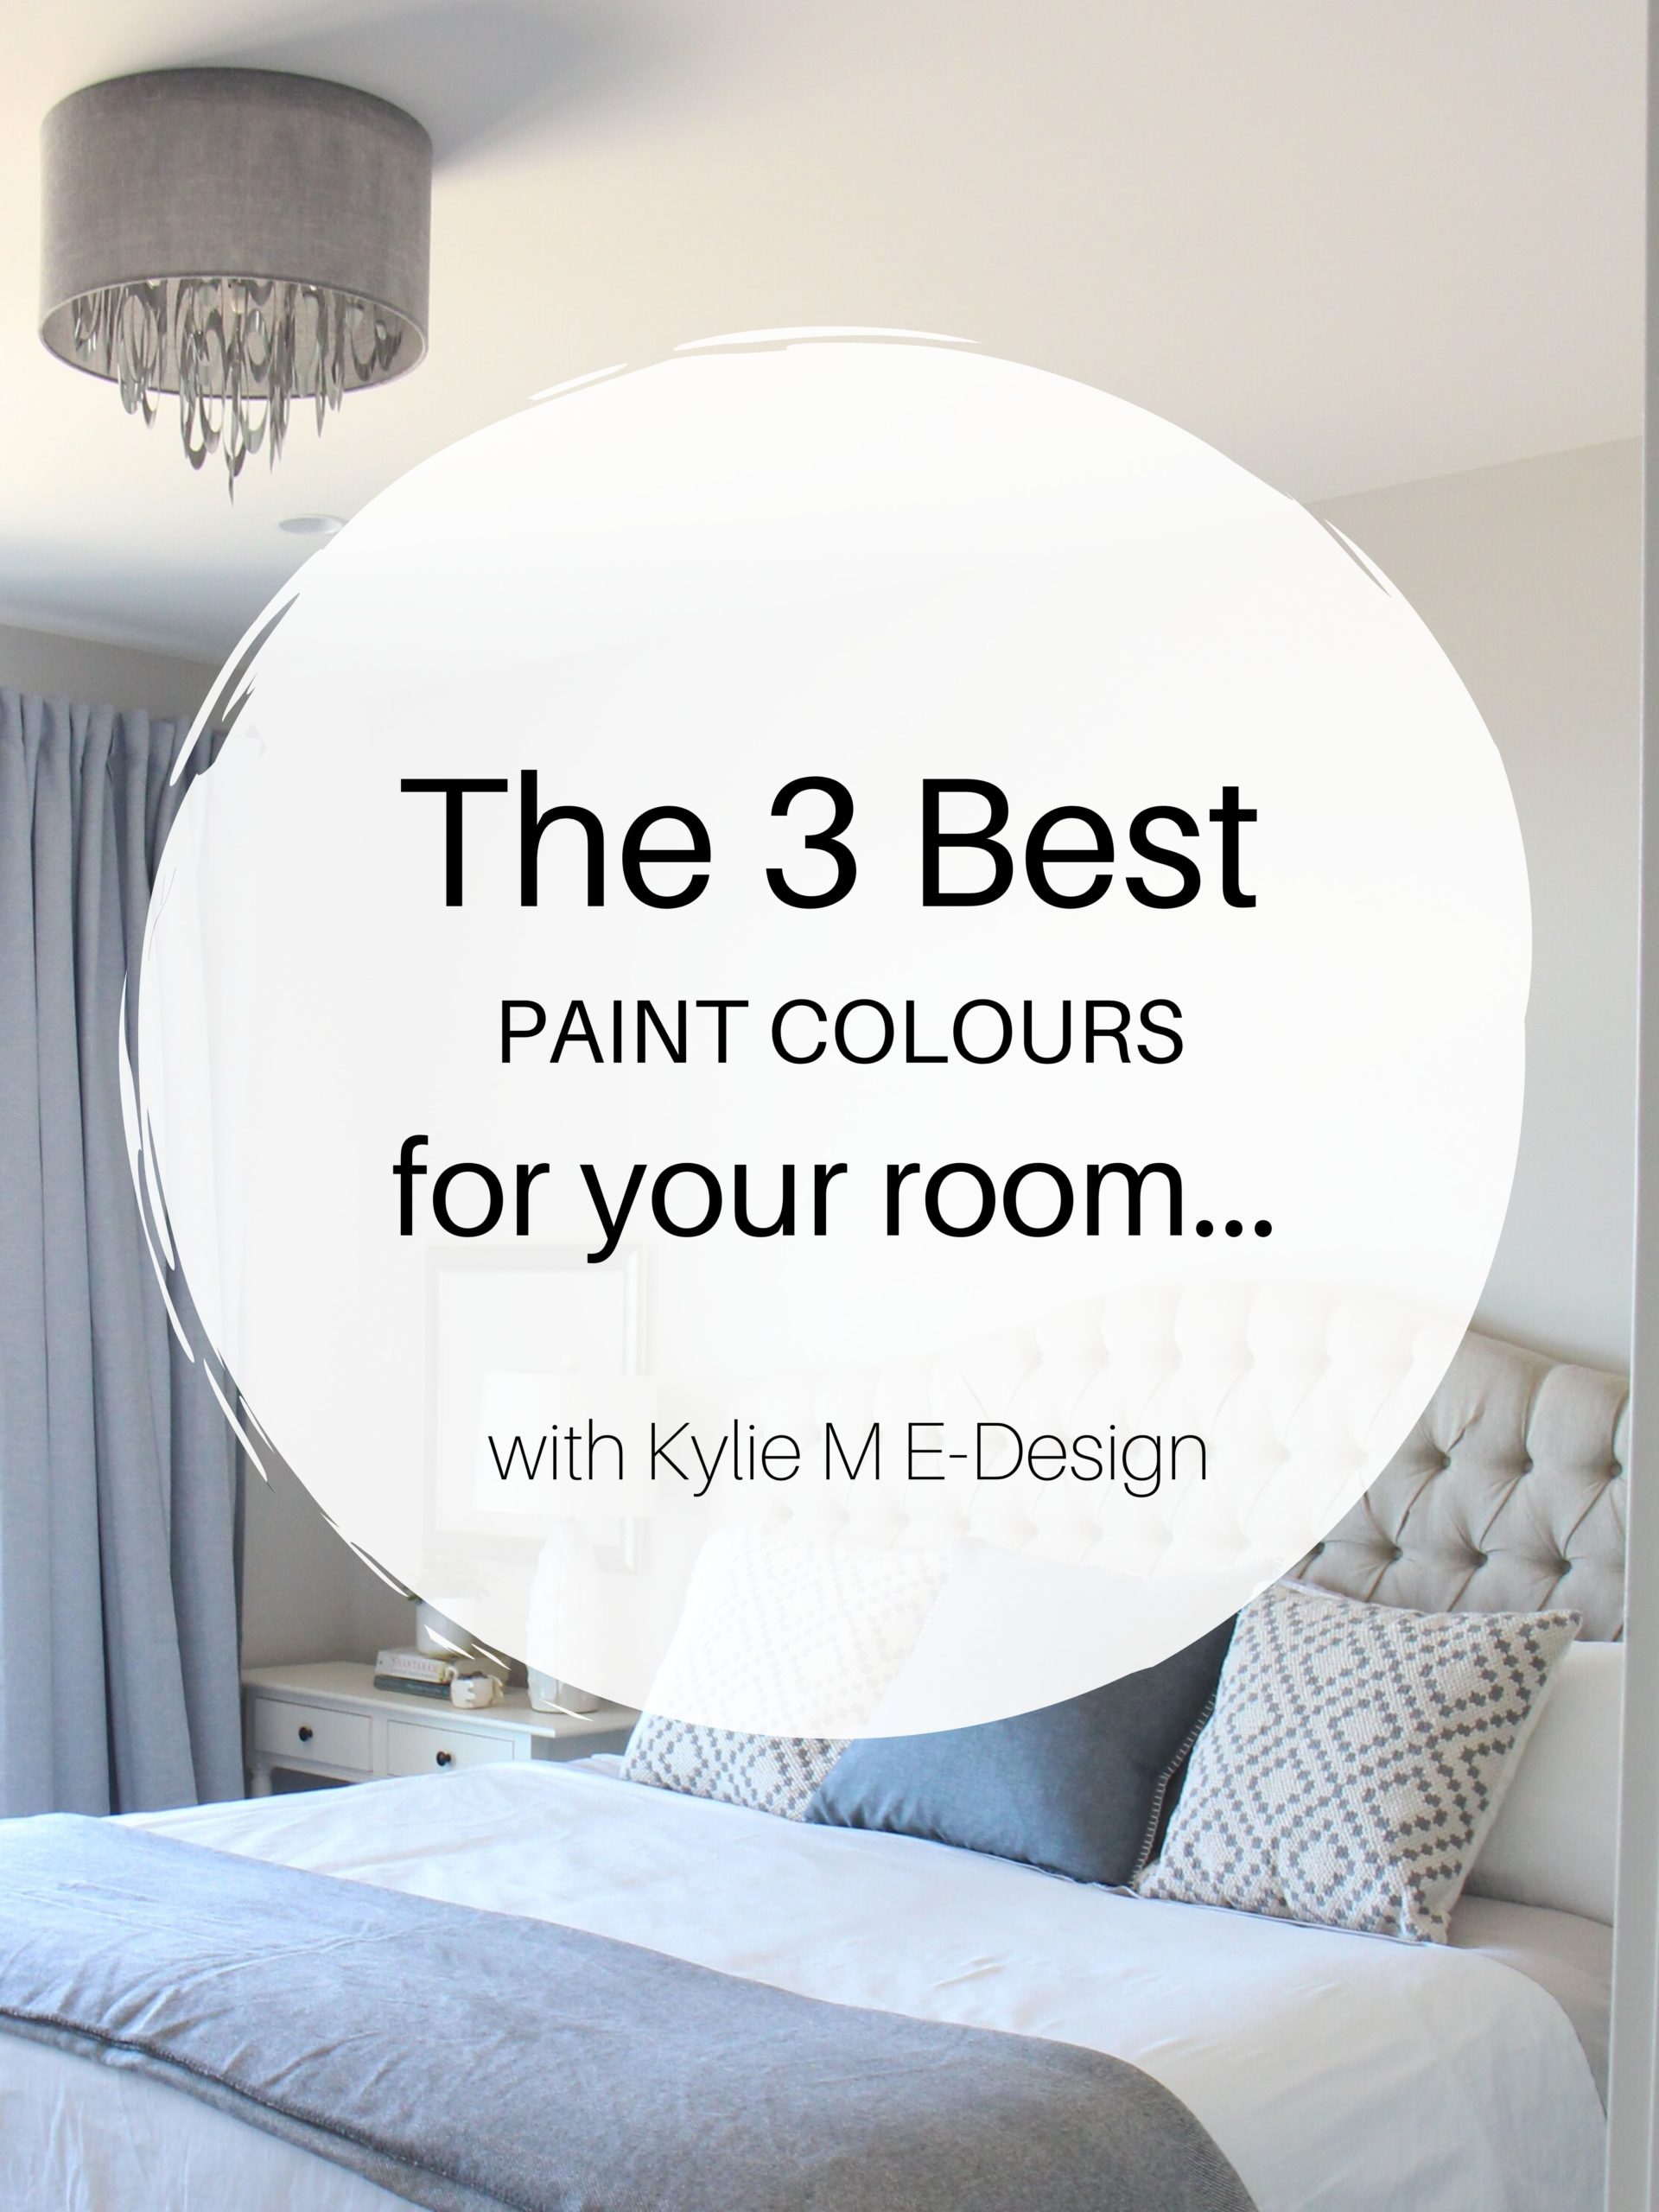 The best paint colors for room or cabinets. Benjamin or Sherwin Williams paint colours. Kylie M Interiors Virtual, Edesign, online paint colour consultant and blogger market